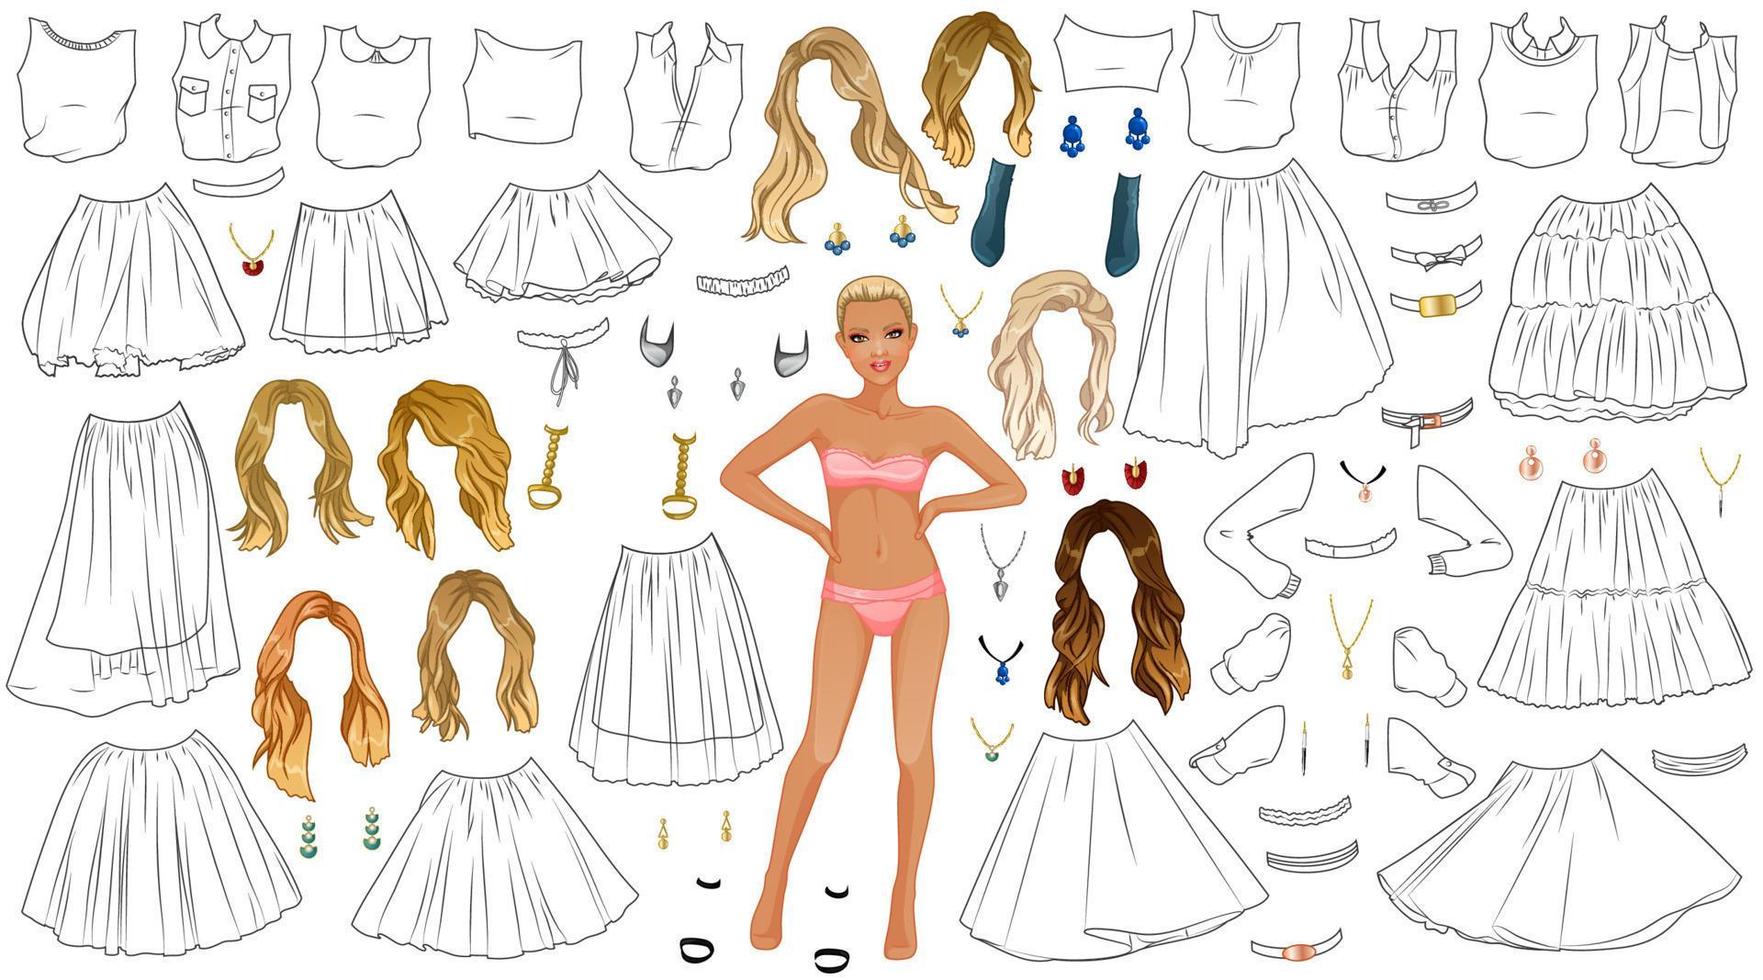 Tutu Skirt Coloring Page Paper Doll with Clothes, Hairstyles, Shoes and Accessories. Vector Illustration